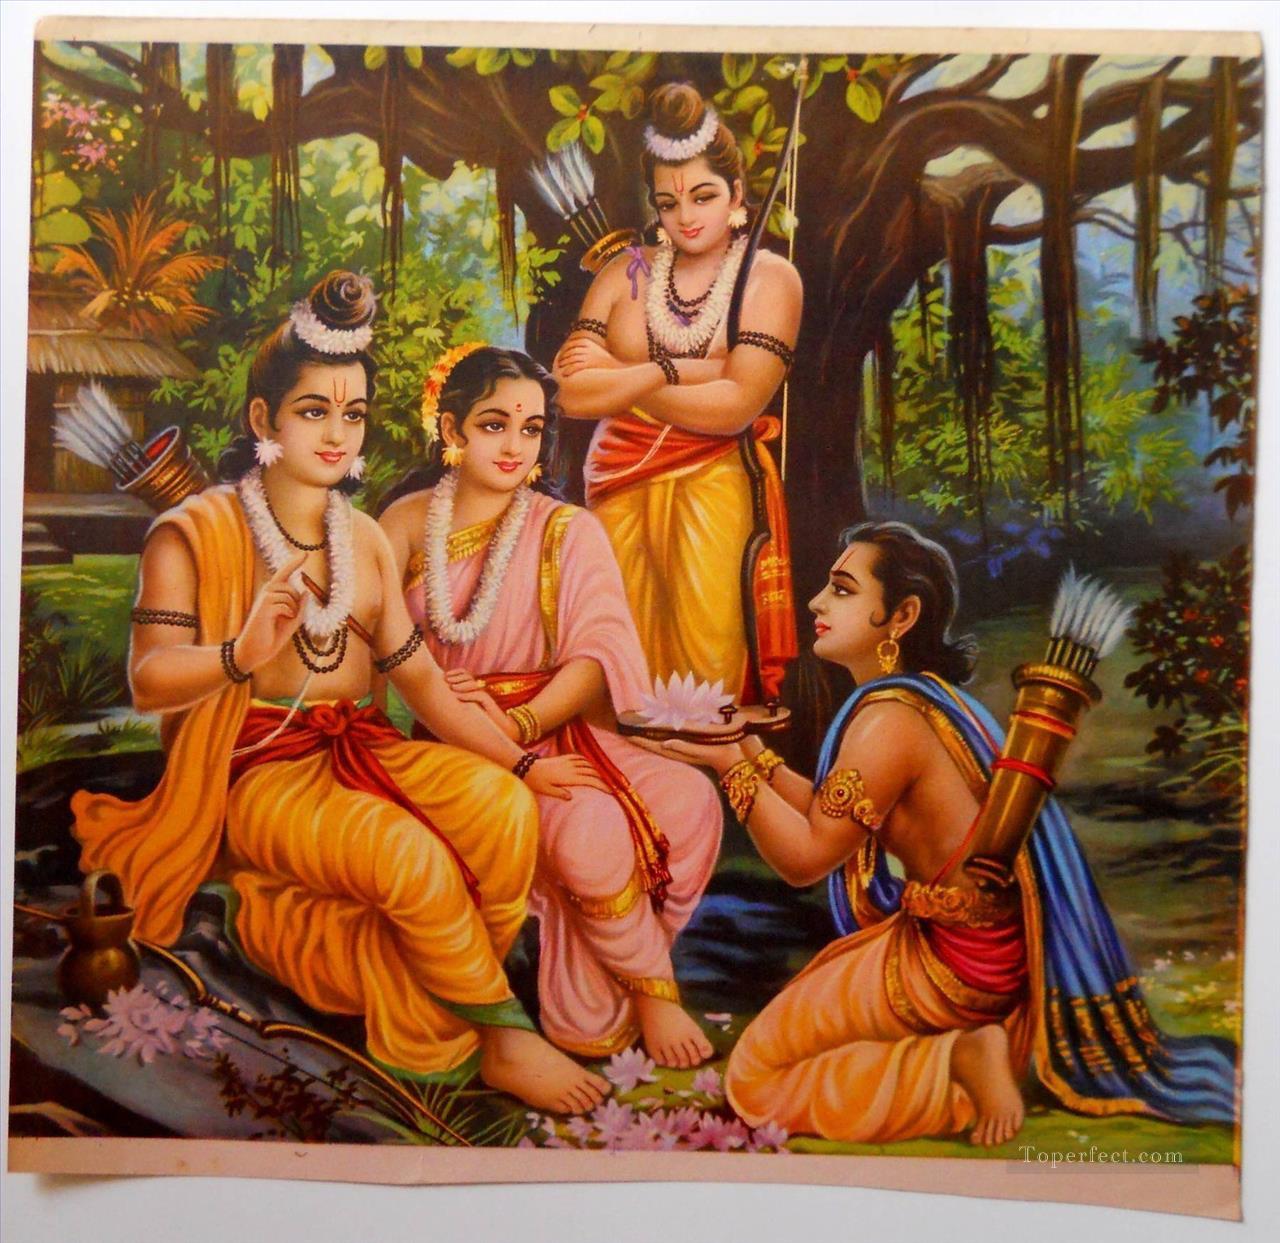 Ram with his Wife Sita and Brothers Laxman and Bharat from India Oil Paintings